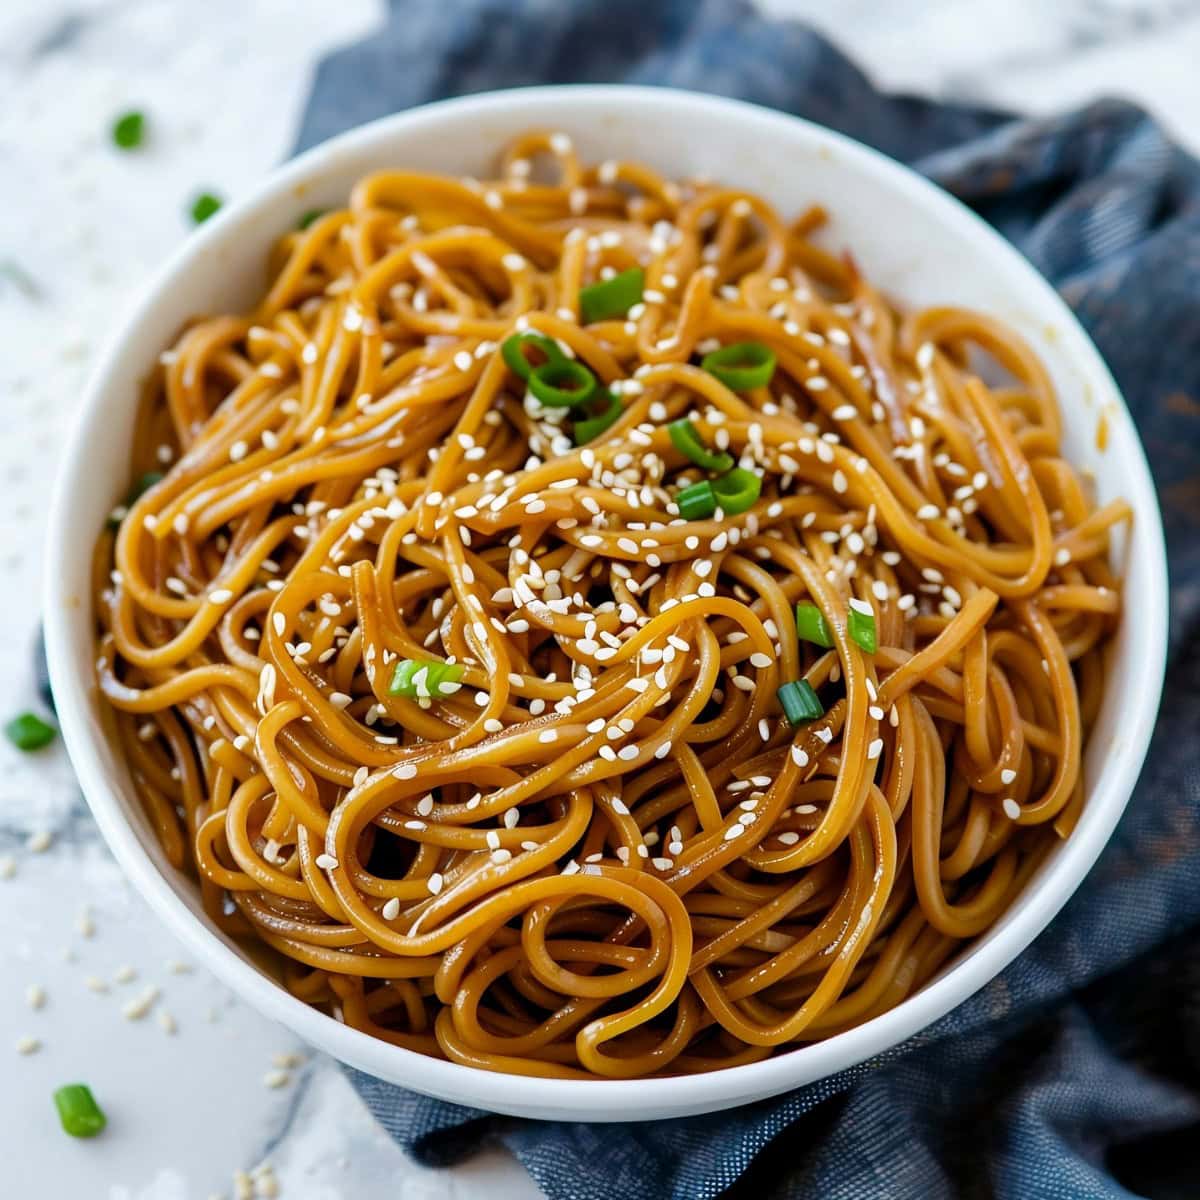 Mouthwatering hibachi noodles, cooked with a touch of teriyaki sauce and garnished with sesame seeds